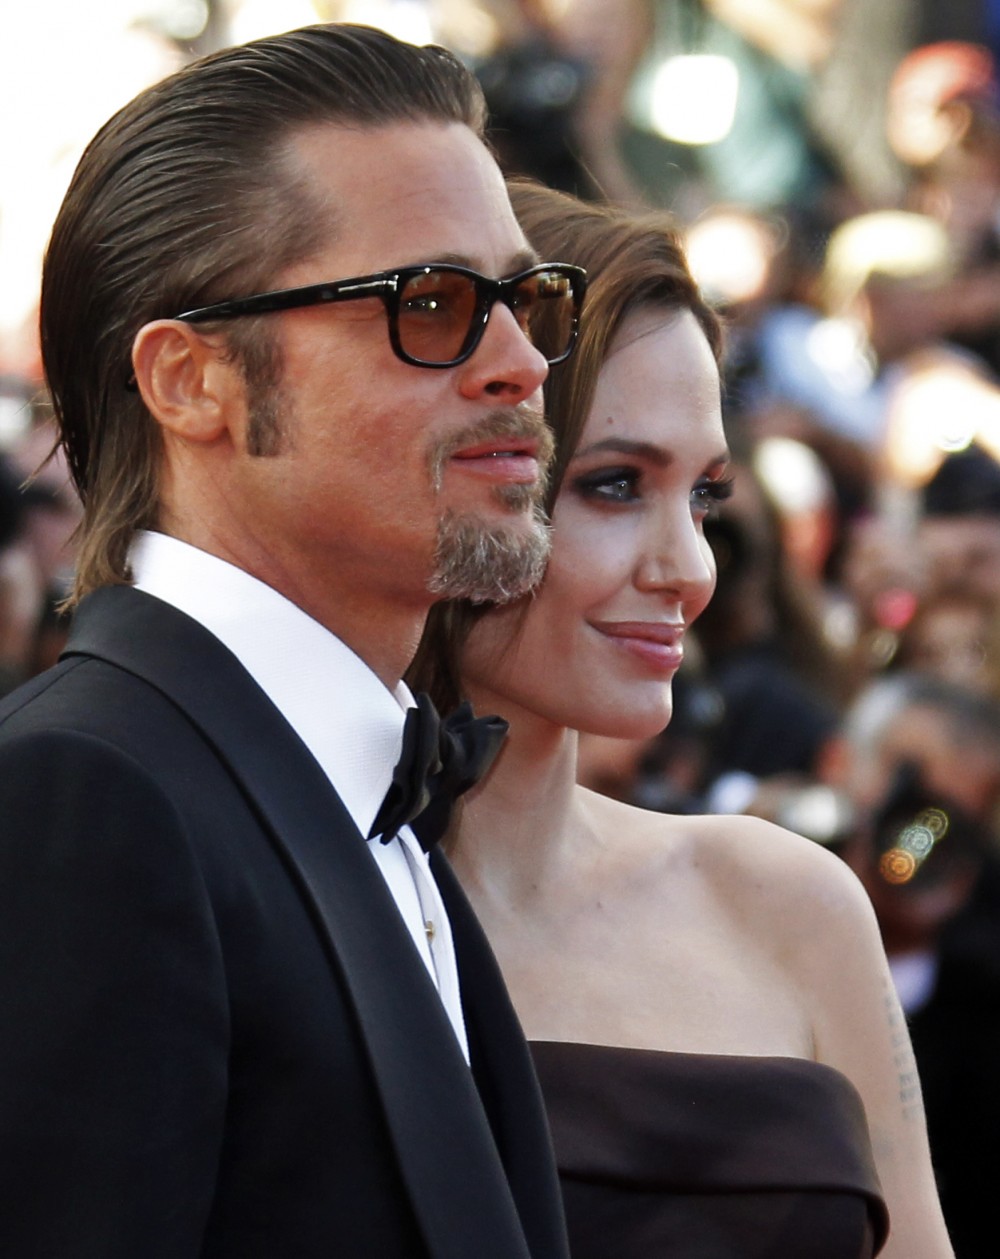 Brangelina the look of love as they dazzle at red carpet in Cannes